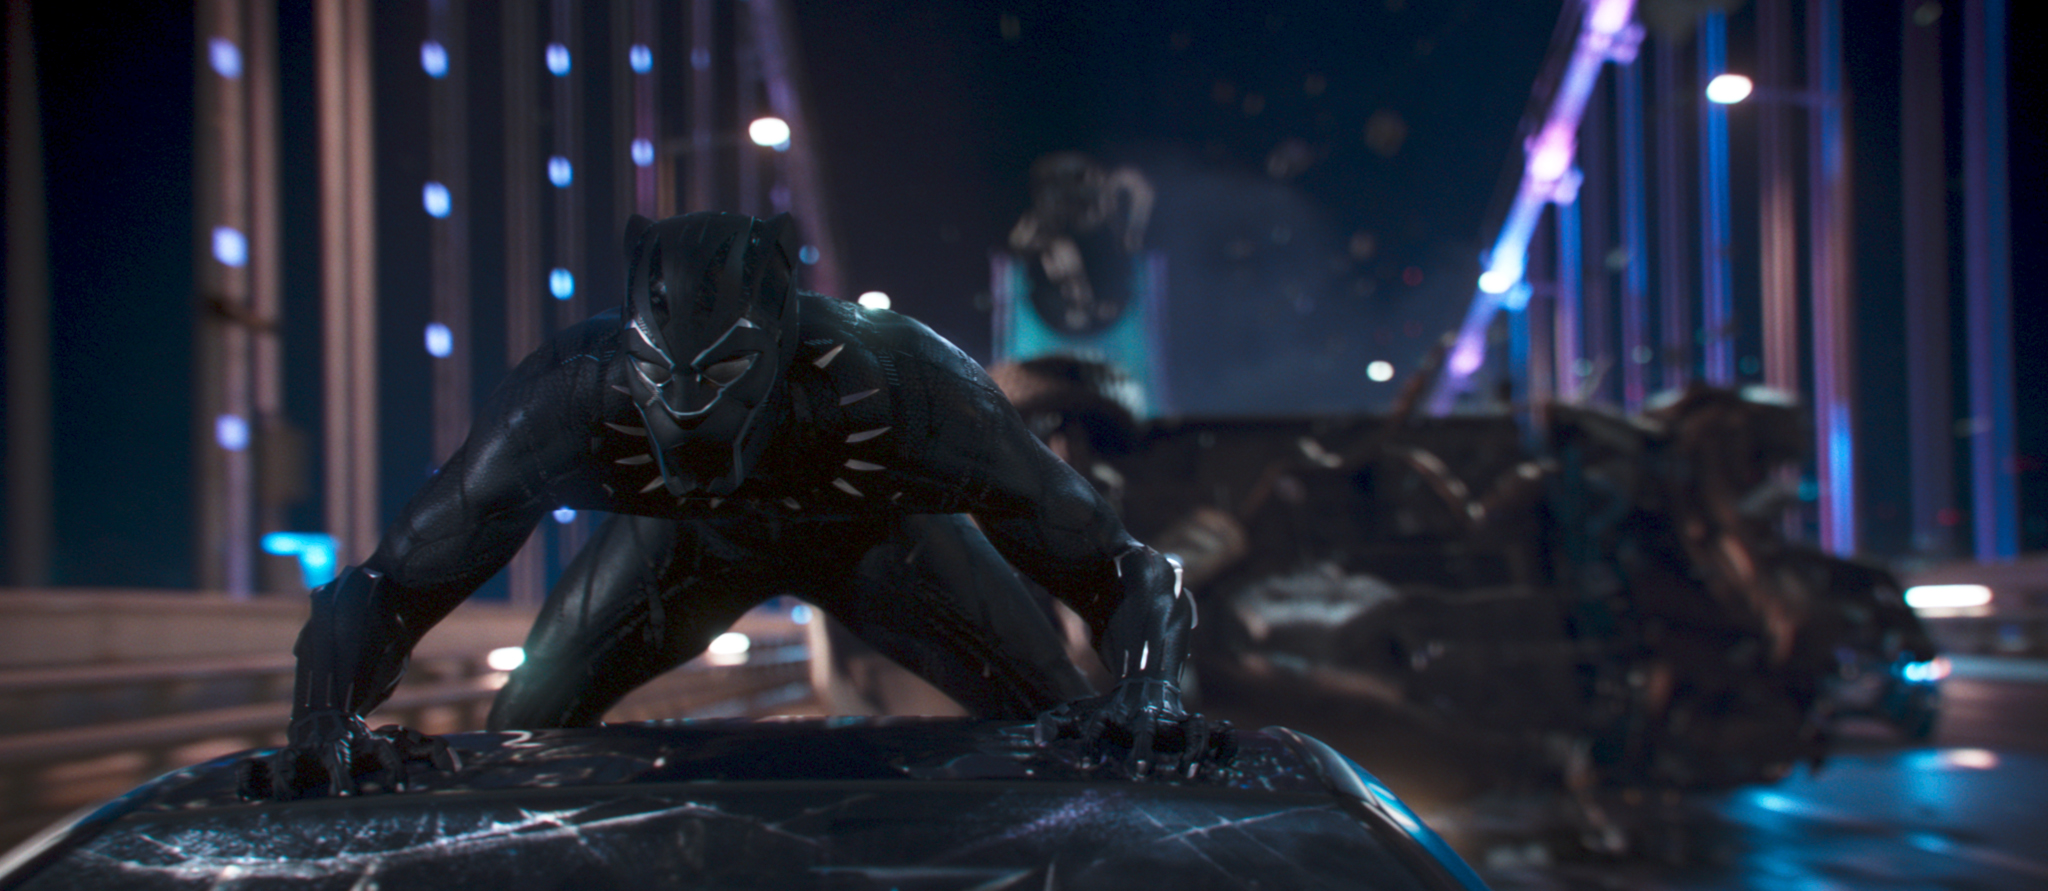 What We Loved About Black Panther